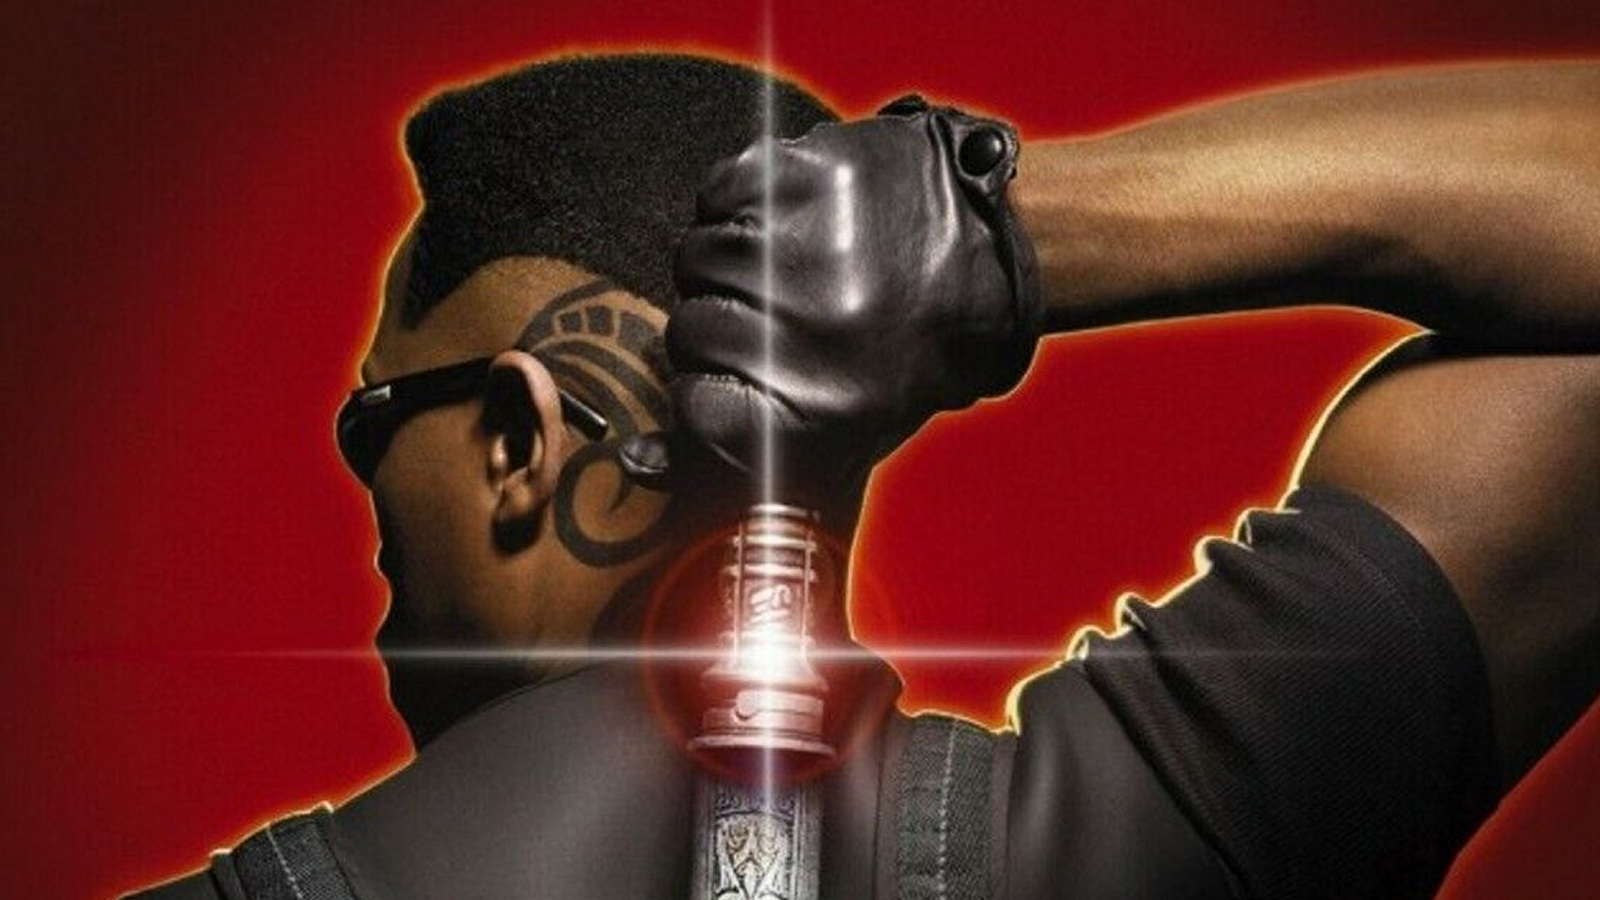 Cropped poster artwork for 1998's Blade